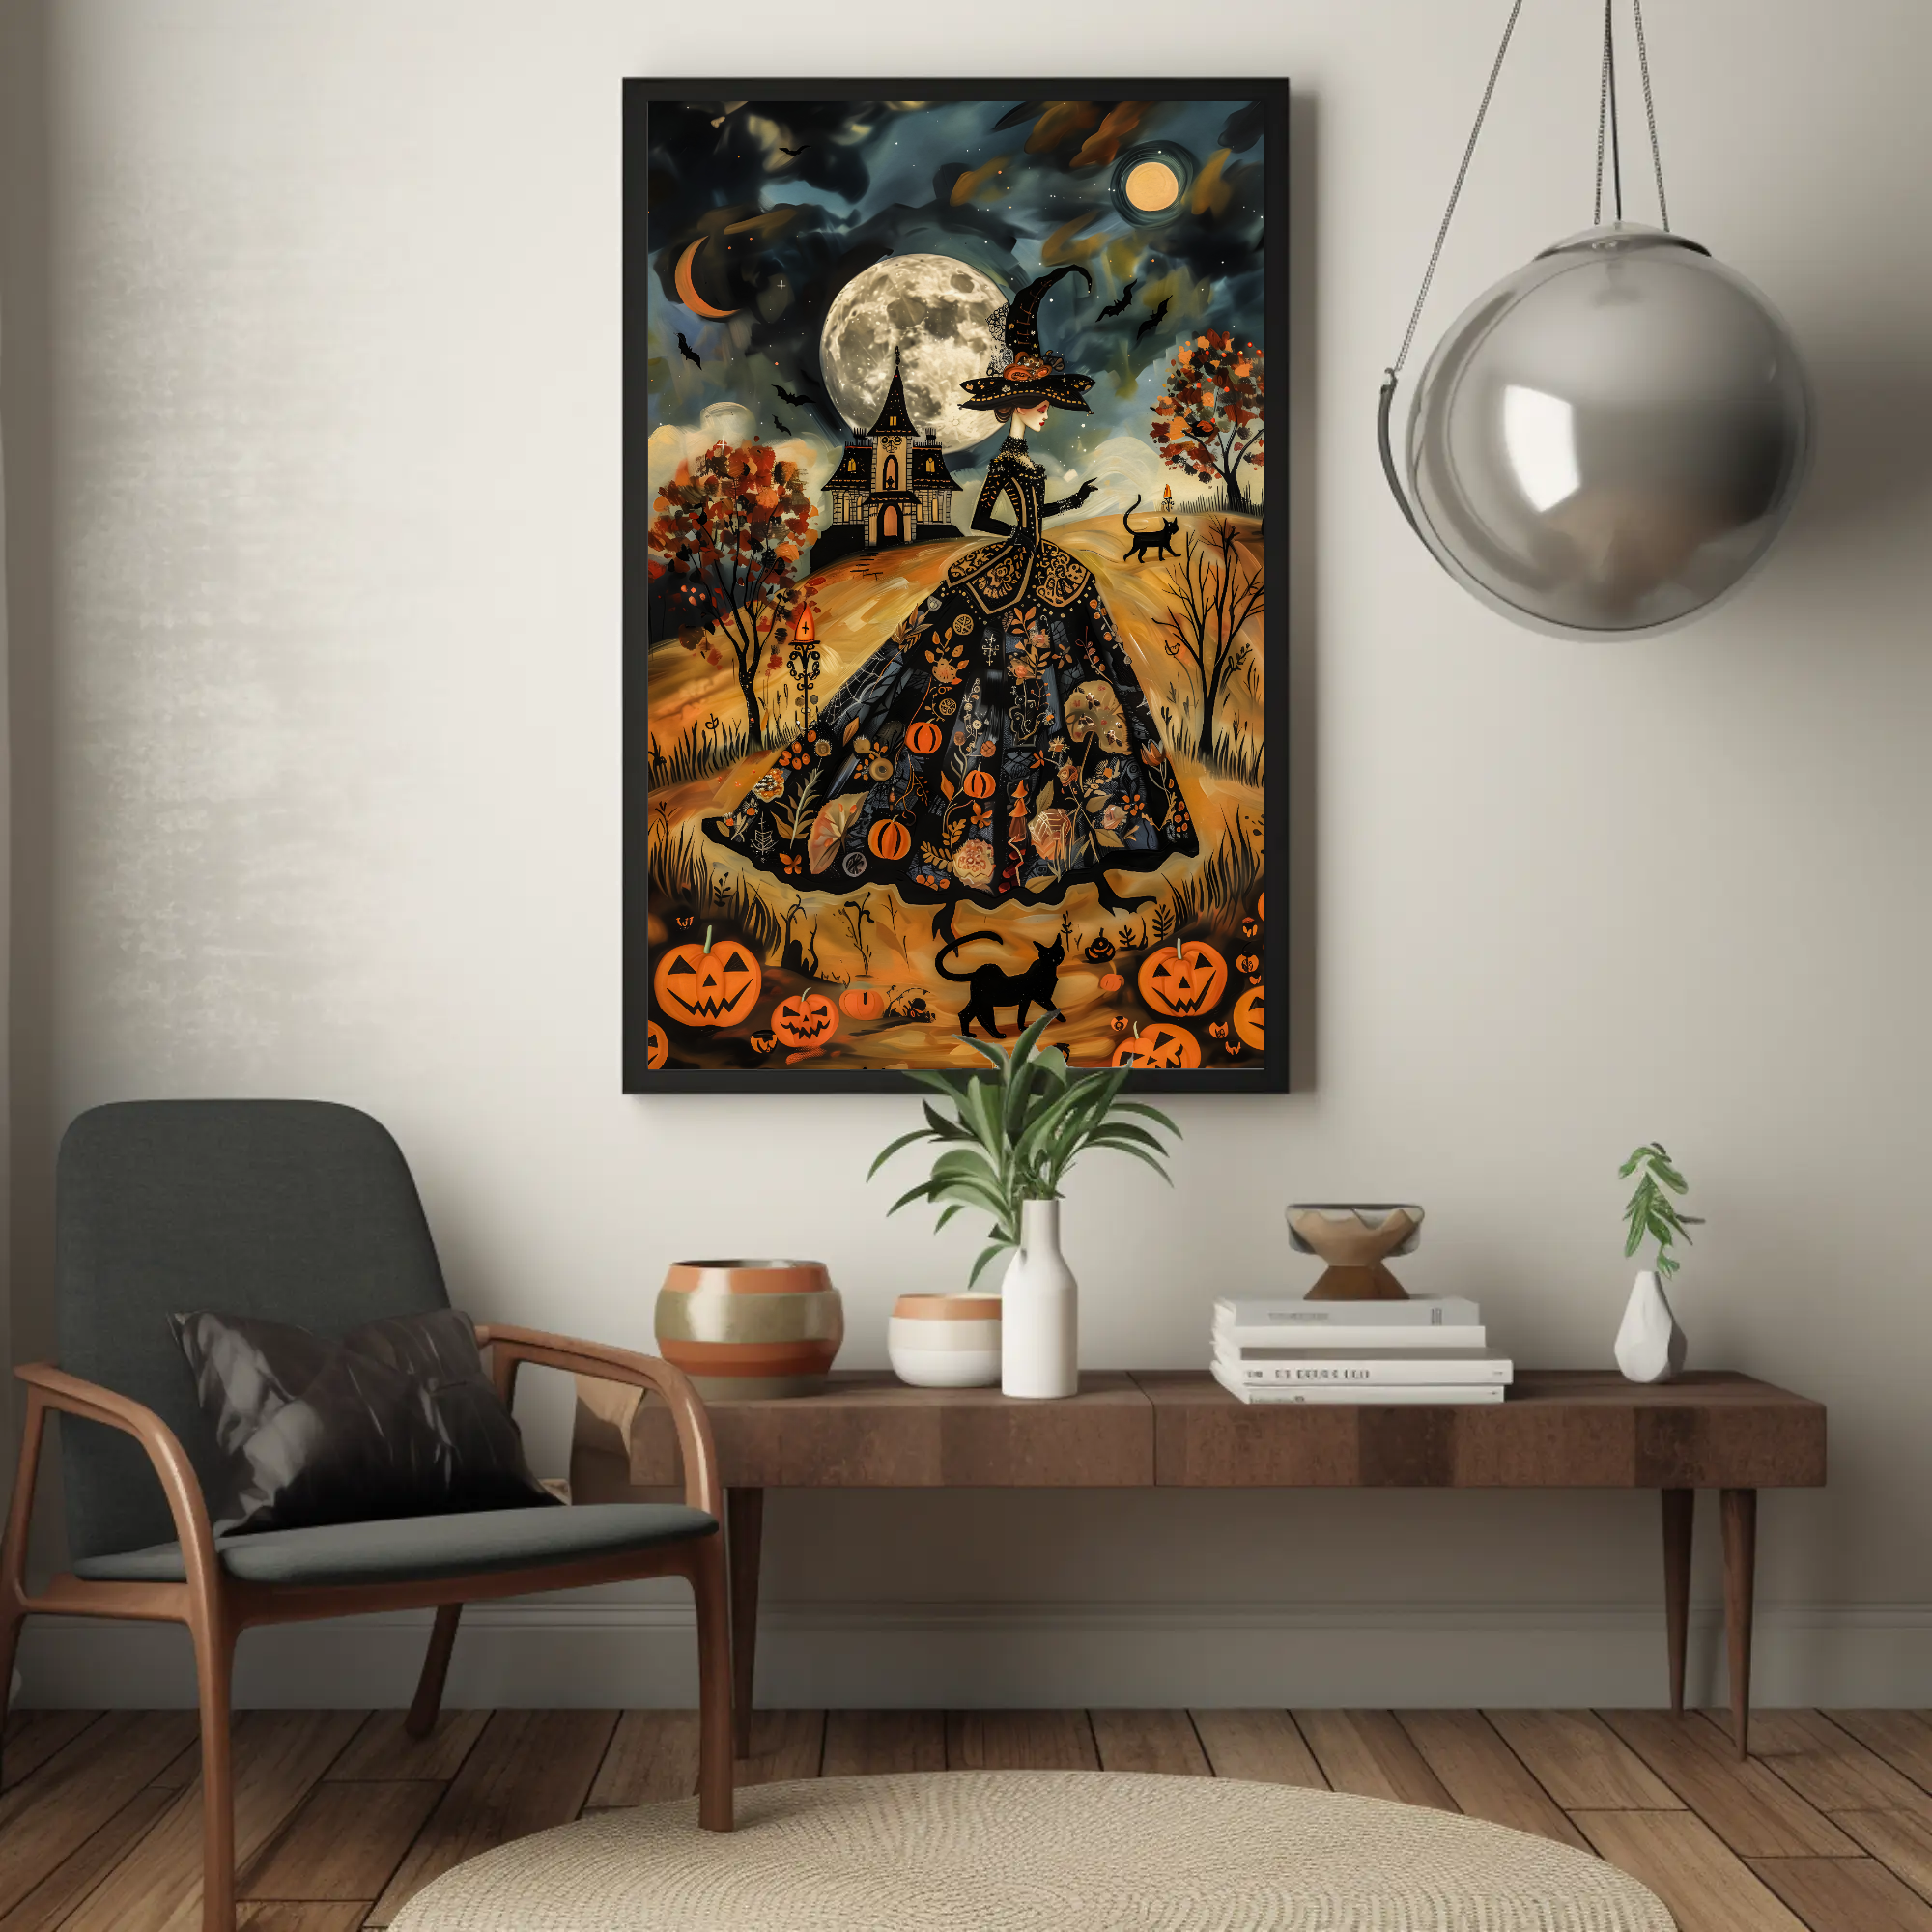 Spooky Yet Sweet: Whimsical Halloween Witch Wall Art